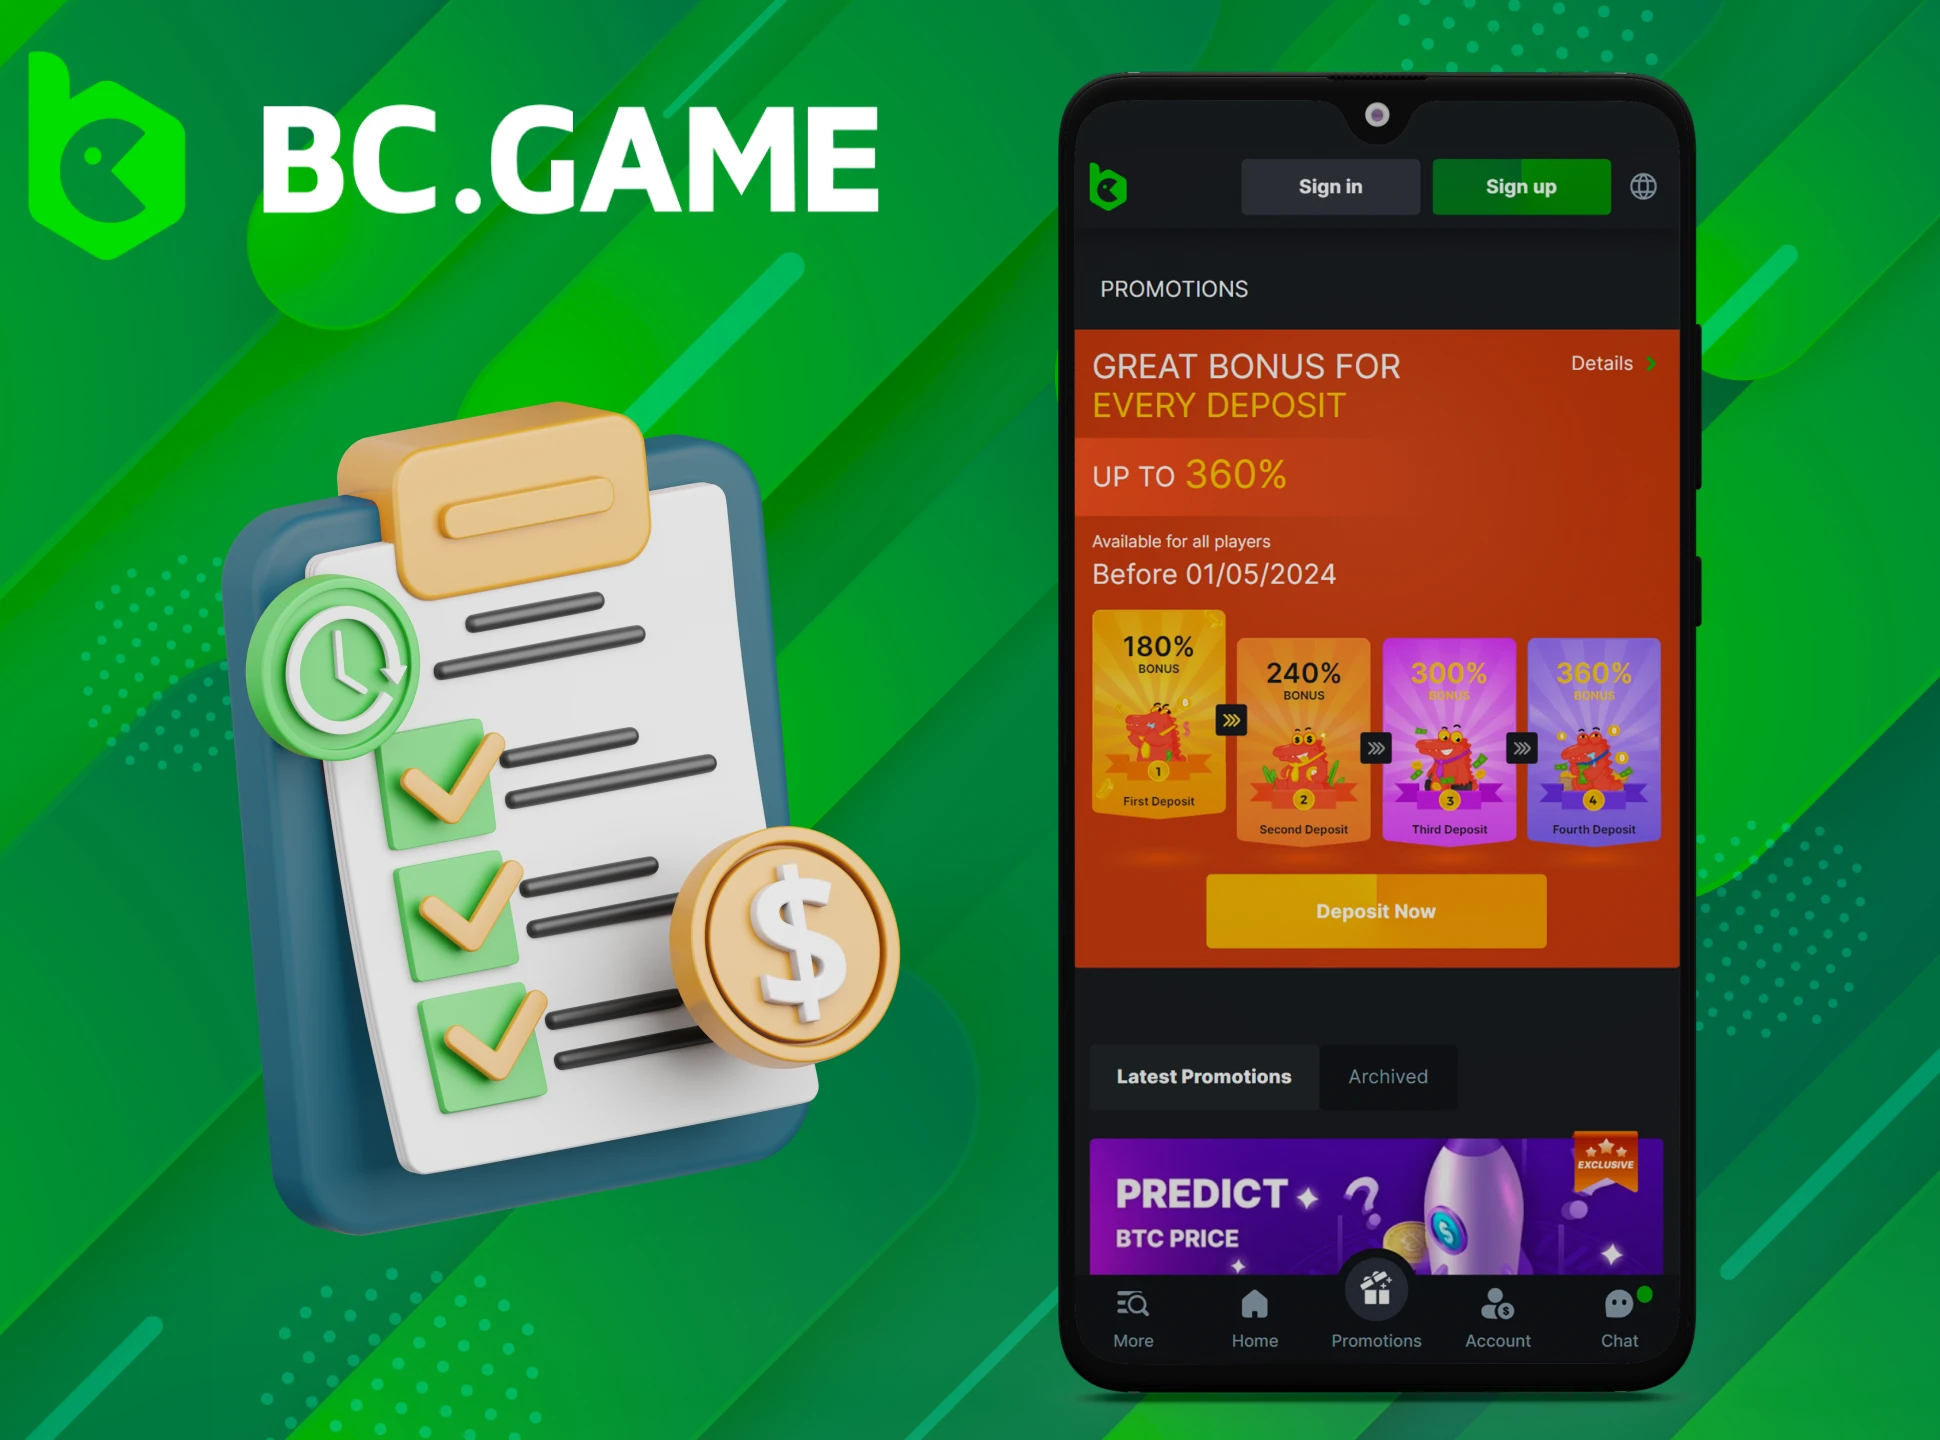 Here are the wagering requirements for the BC Game Casino welcome bonus.